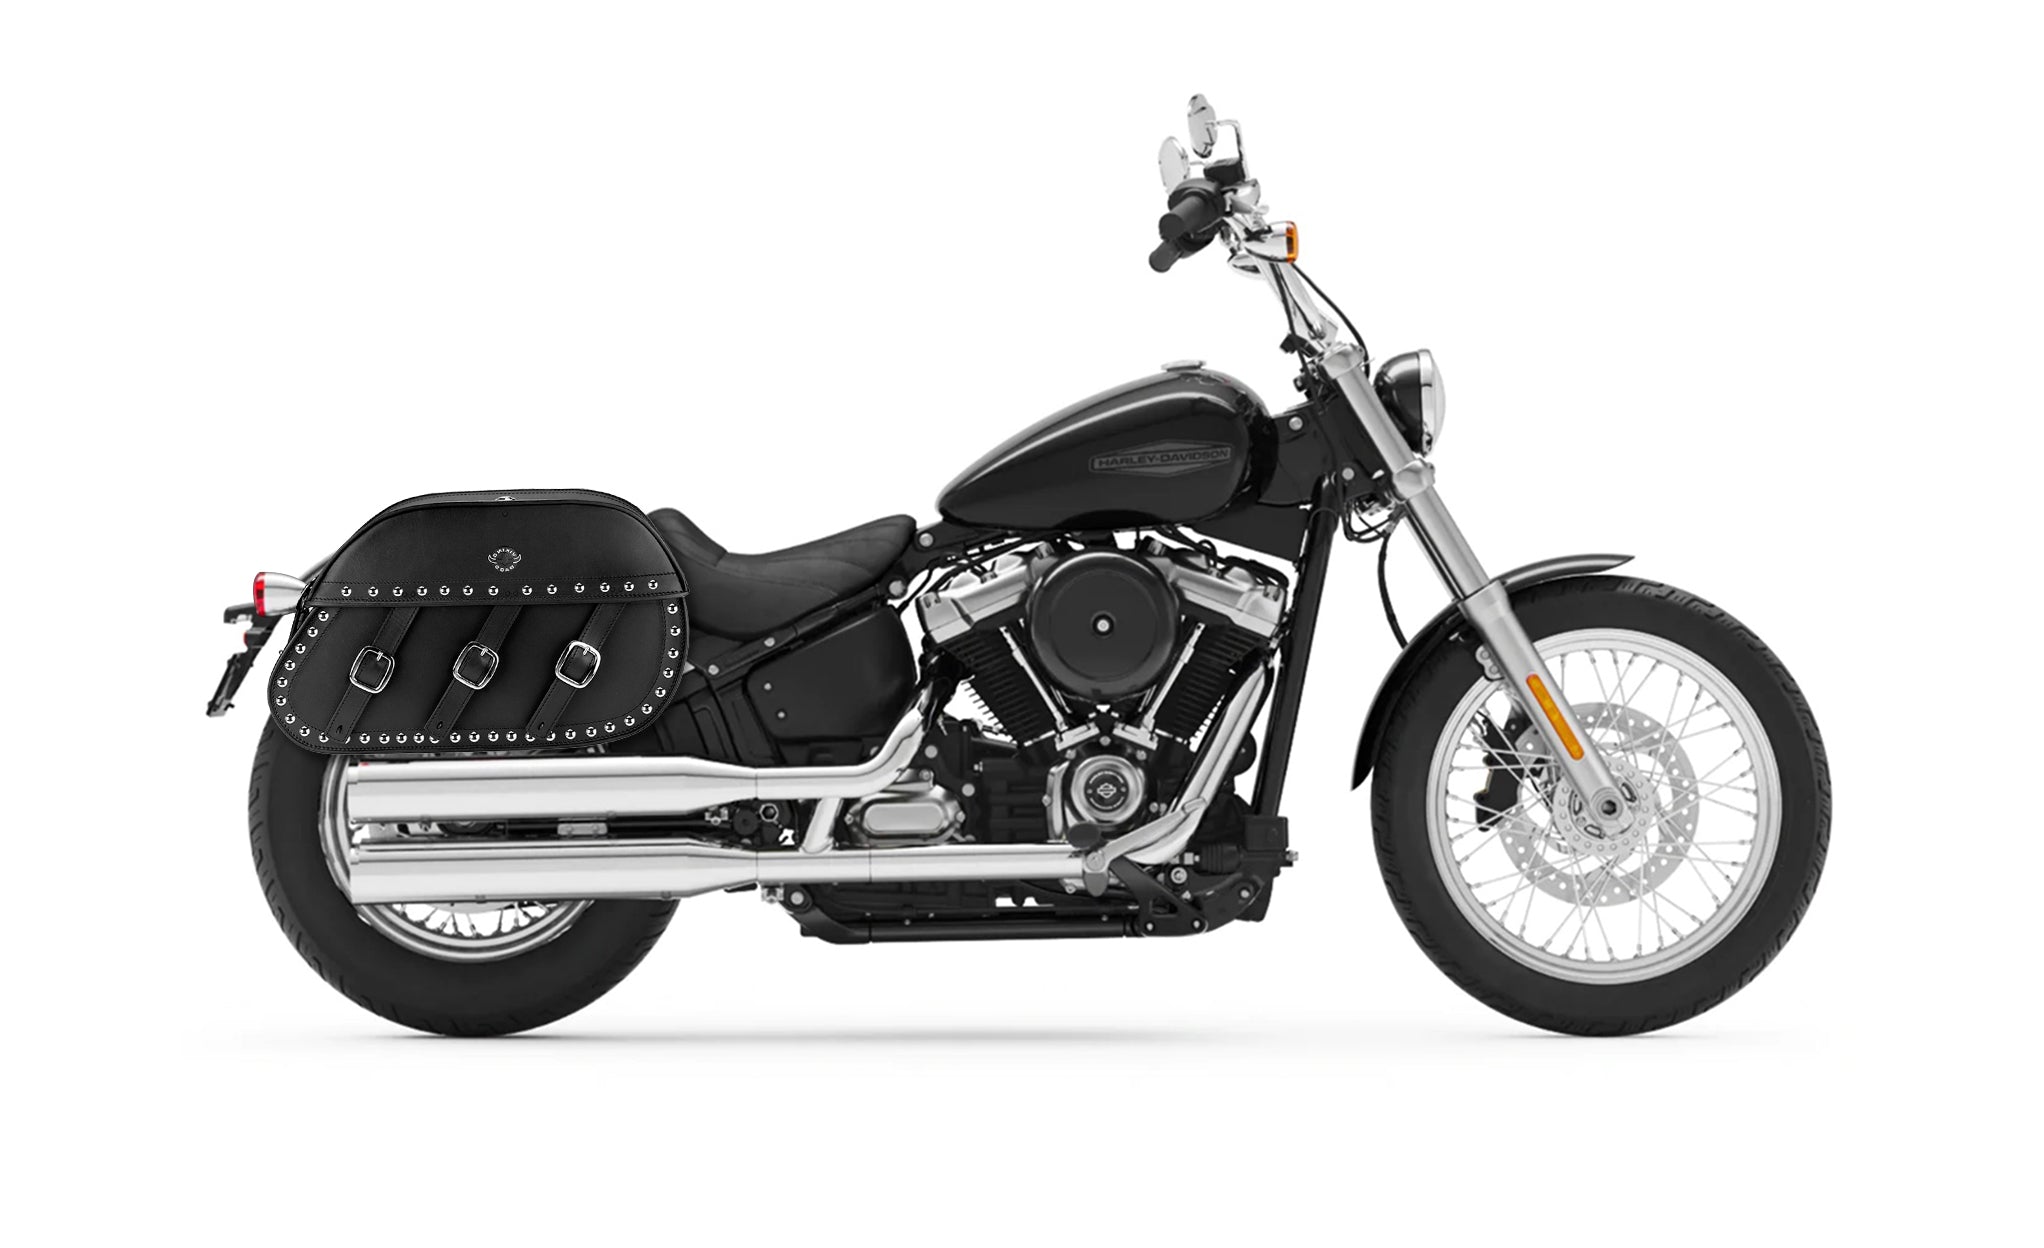 34L - Trianon Extra Large Studded Leather Motorcycle Saddlebags for Harley Softail Standard FXST on Bike Photo @expand